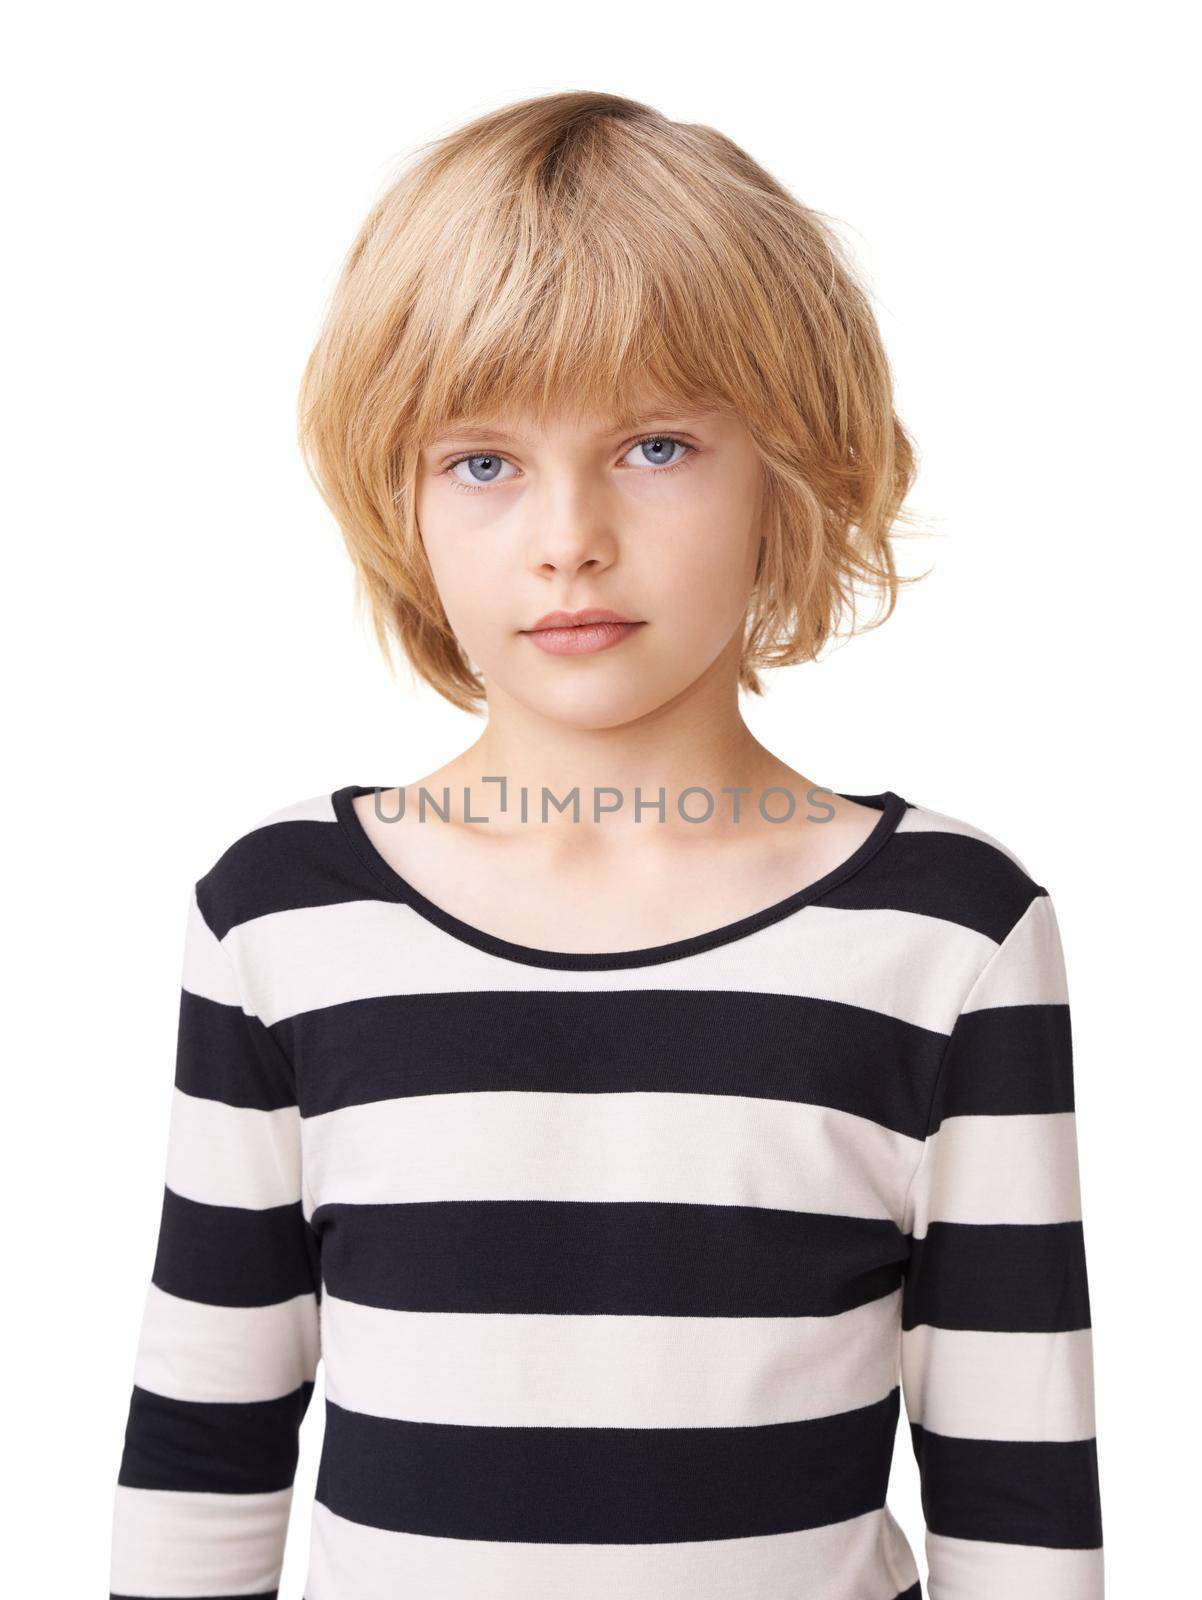 Portait perfection. Portrait of a pretty little girl standing against a white background